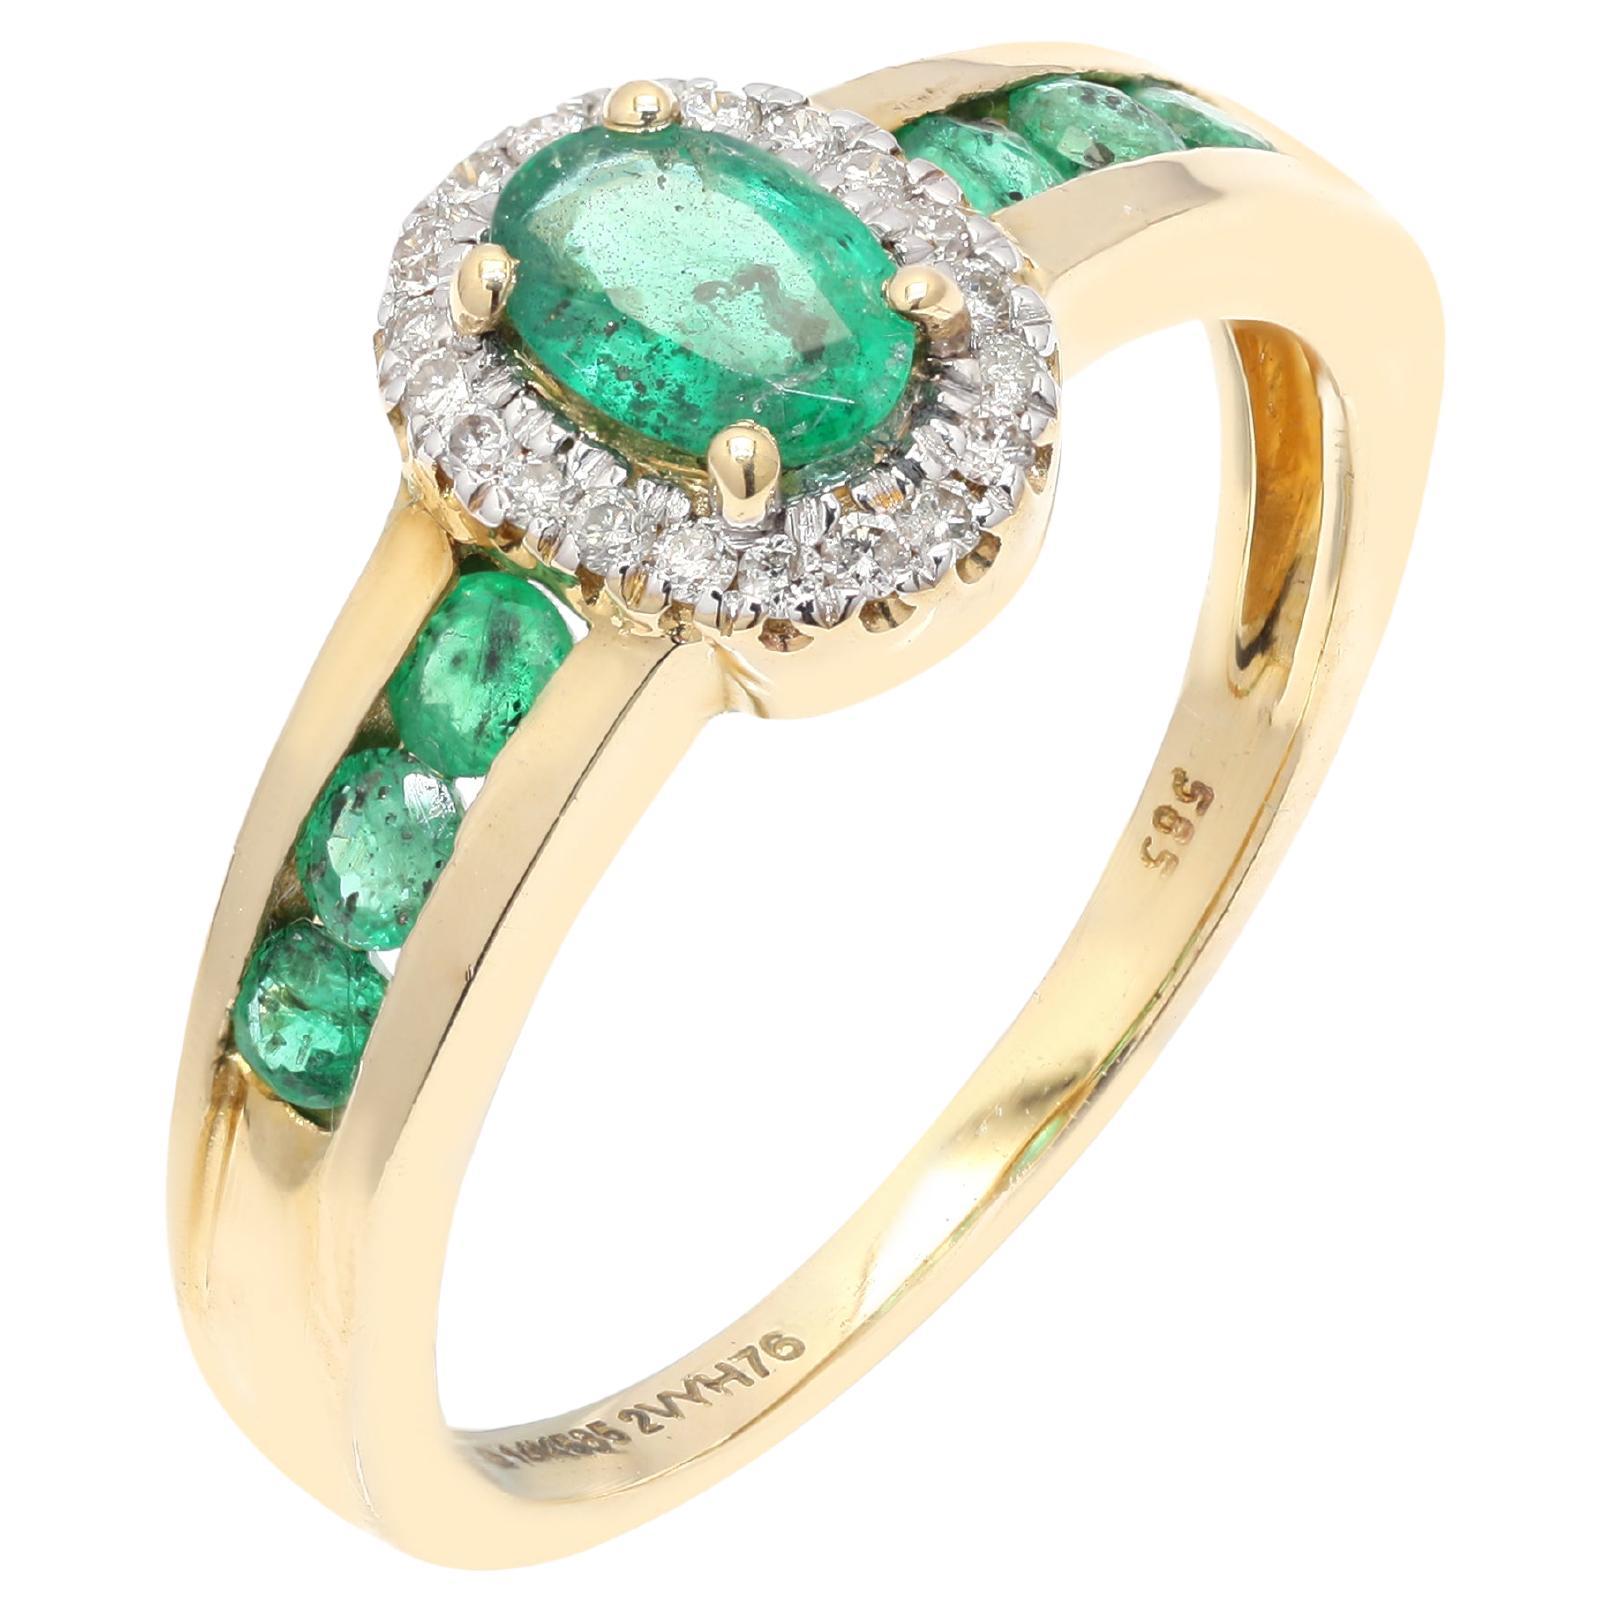 For Sale:  Emerald Engagement Ring with Halo Diamond Set in 14K Solid Yellow Gold